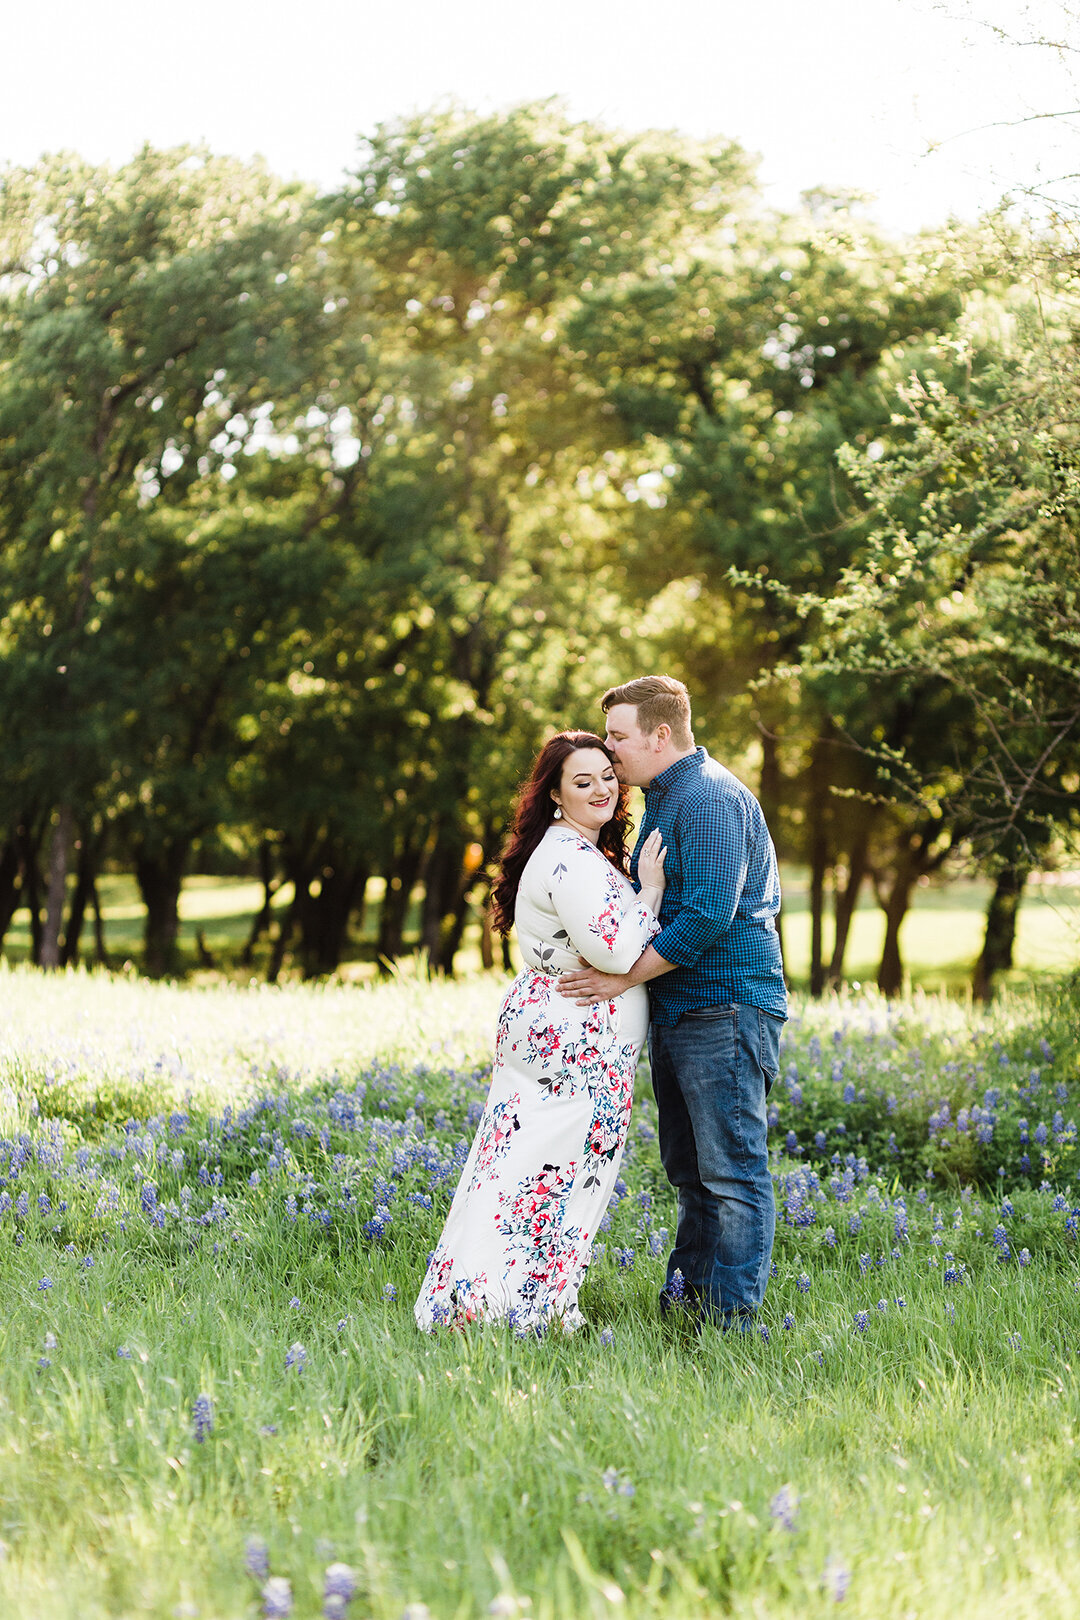 A couple holding each other close in a field of bluebonnets during their engagement session in Ennis, Texas. The woman on the right is receiving a kiss on her temple and is wearing a long white dress covered in intricate, colorful flowers. The man on the right is wearing a blue checkered dress shit and jeans.